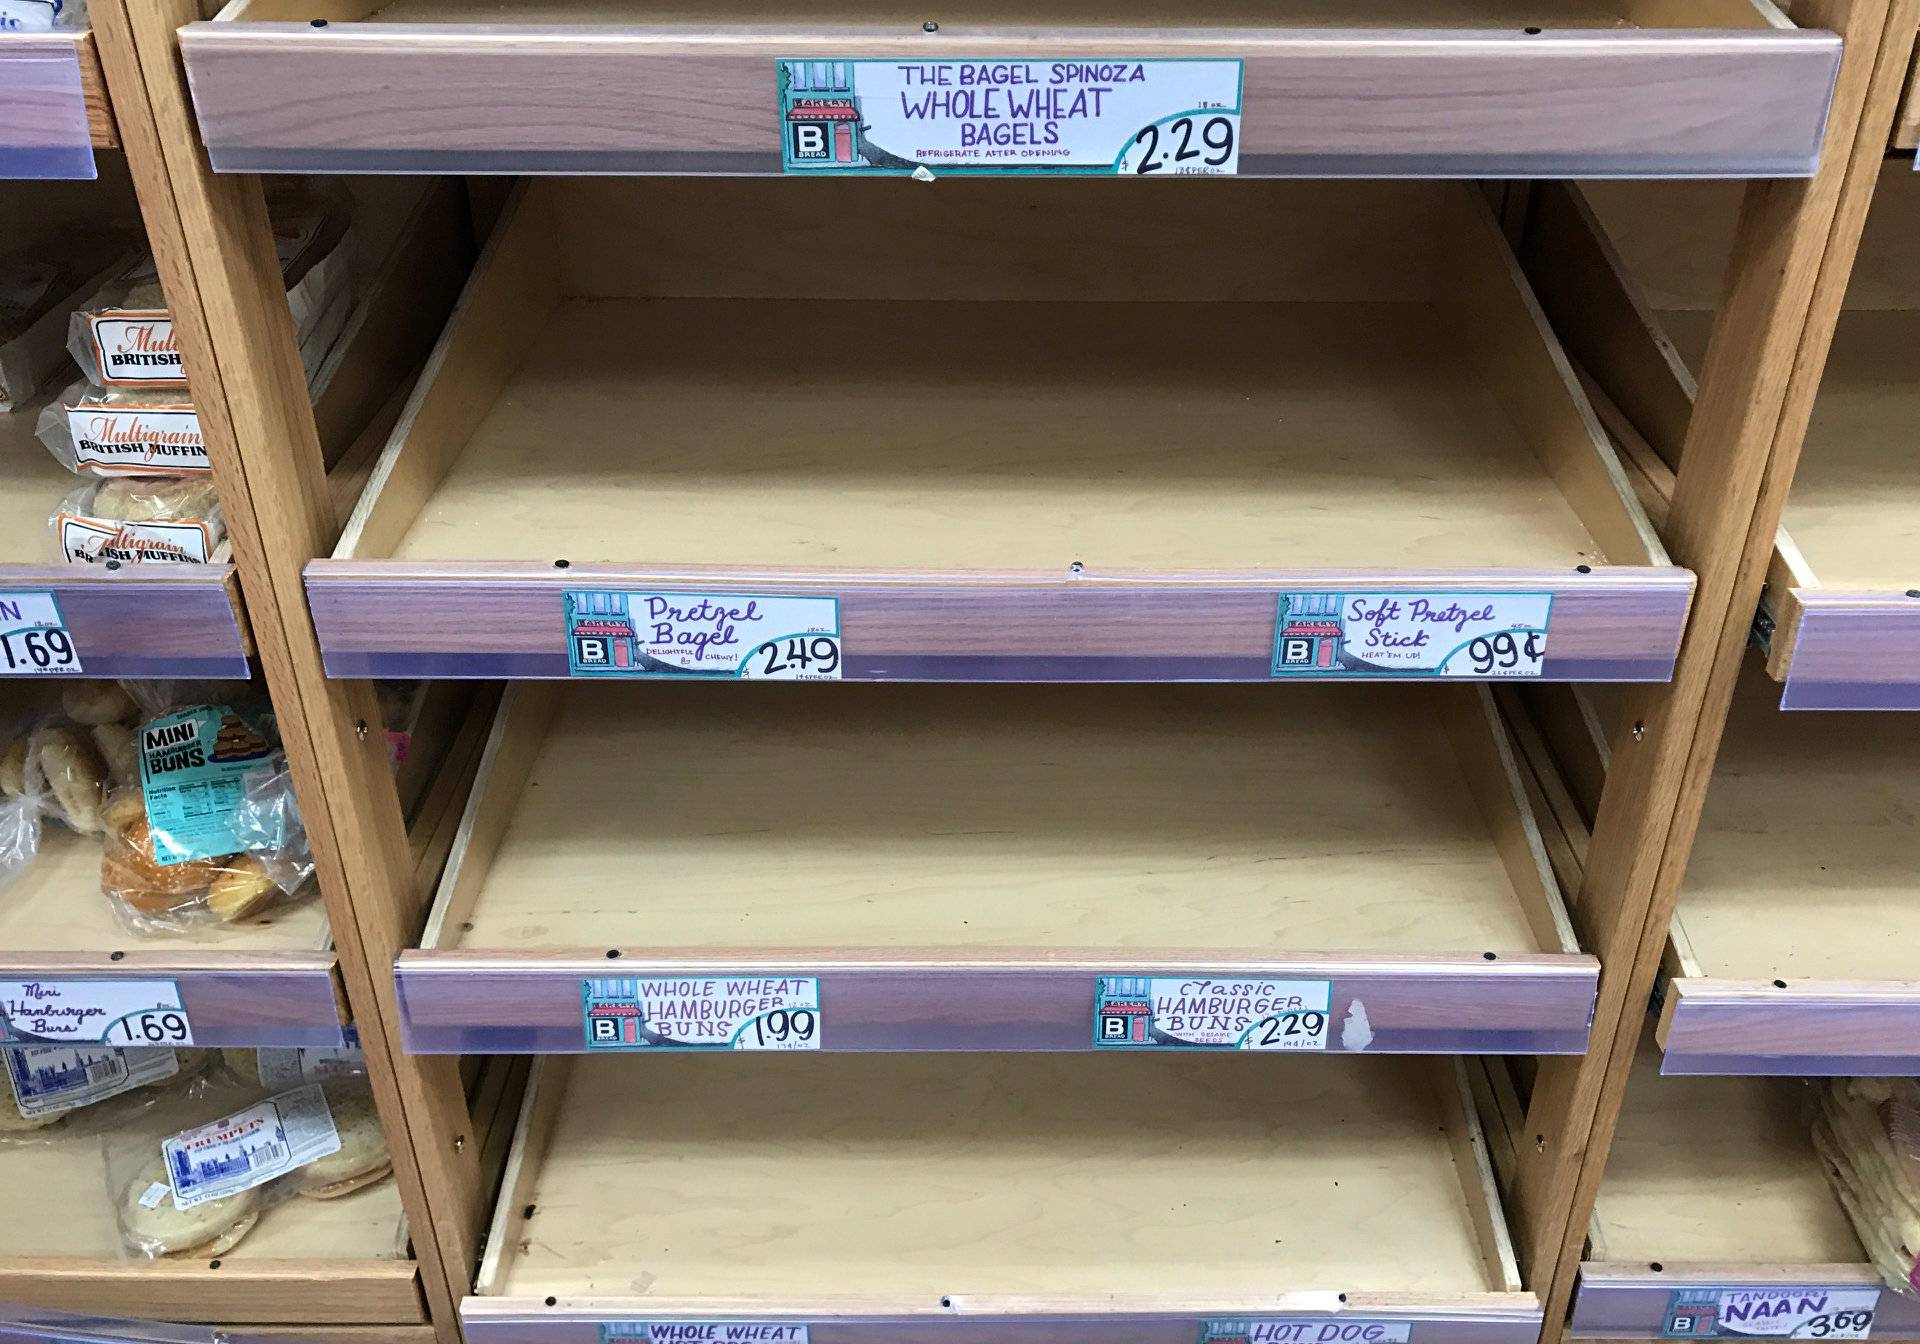 Shelves are seen scarce with bread at a Trader Joe's grocery store ahead of a fast-moving winter storm expected to hit the northeastern United States, in the borough of Manhattan in New York